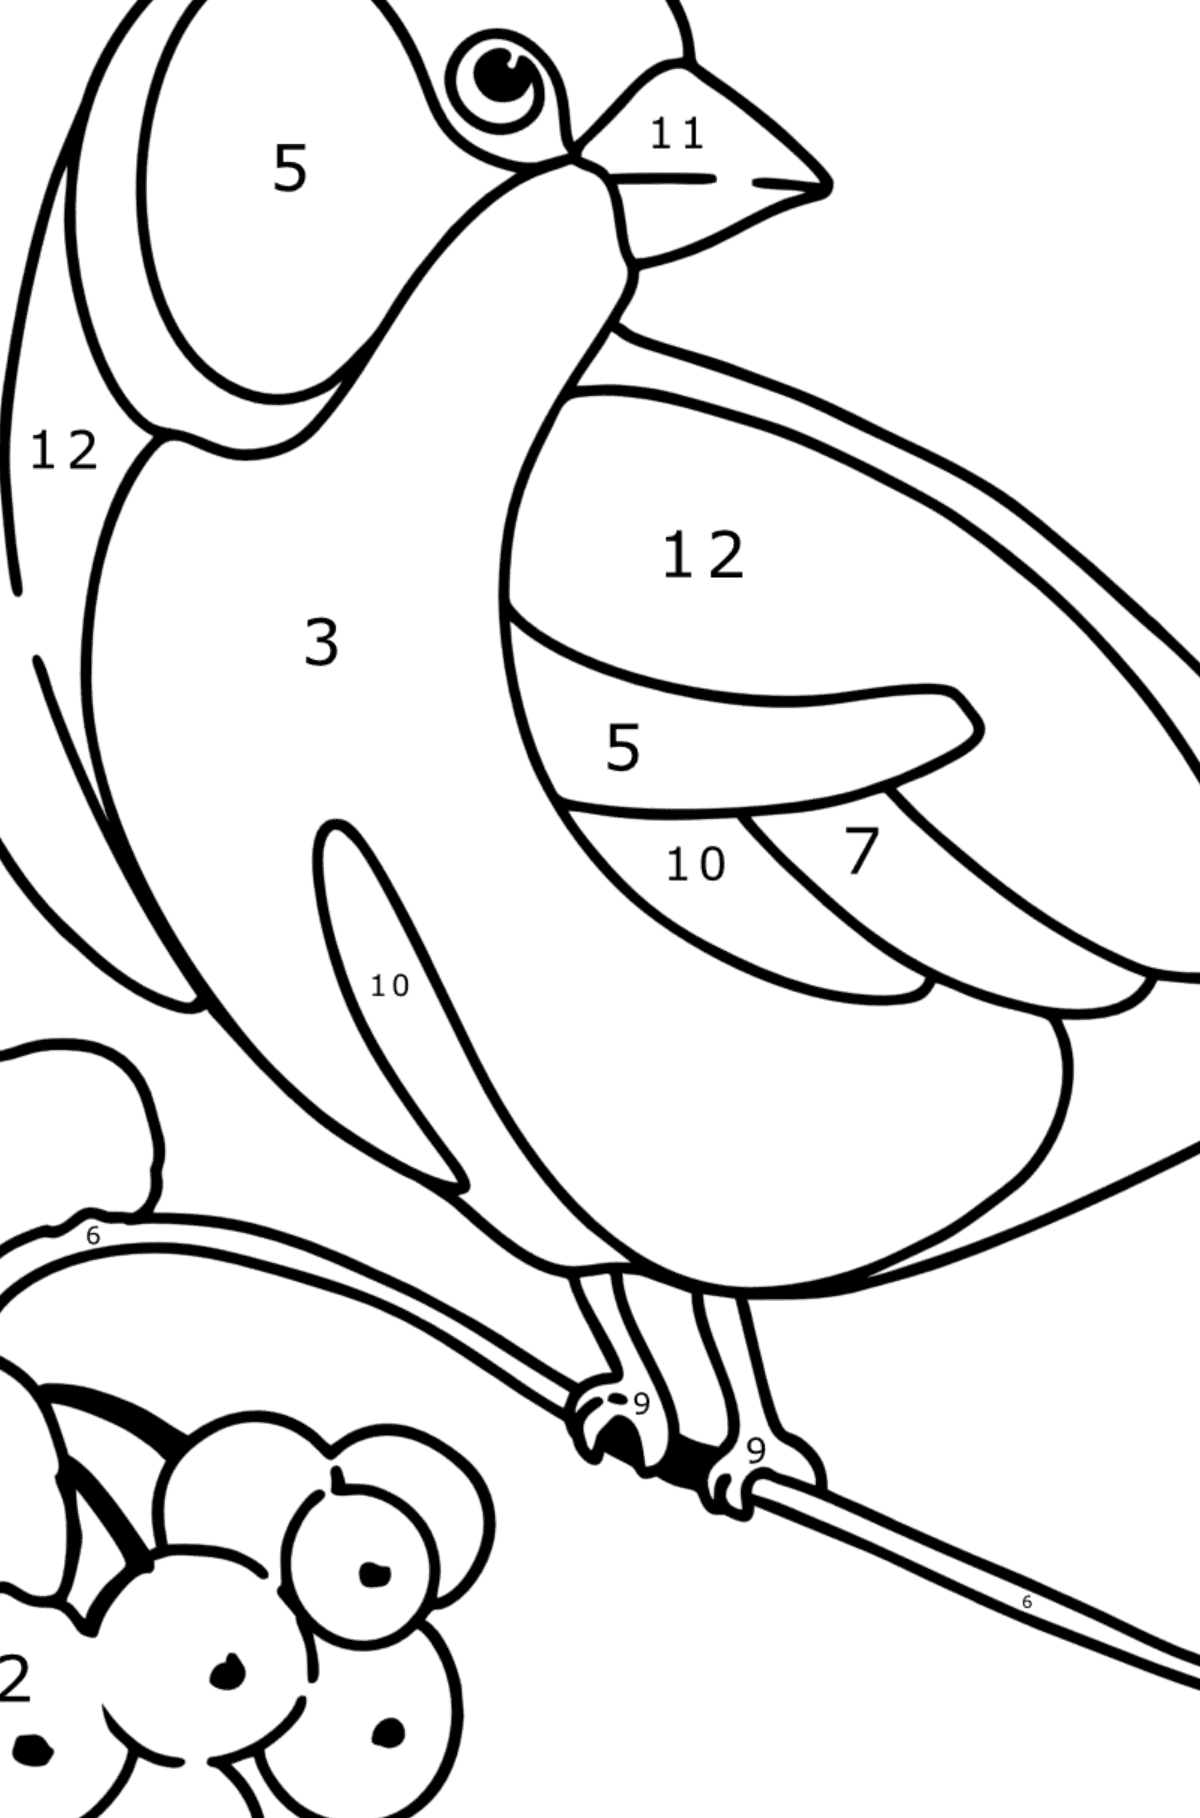 Coloring page - Titmouse on Mountain Ash - Coloring by Numbers for Kids